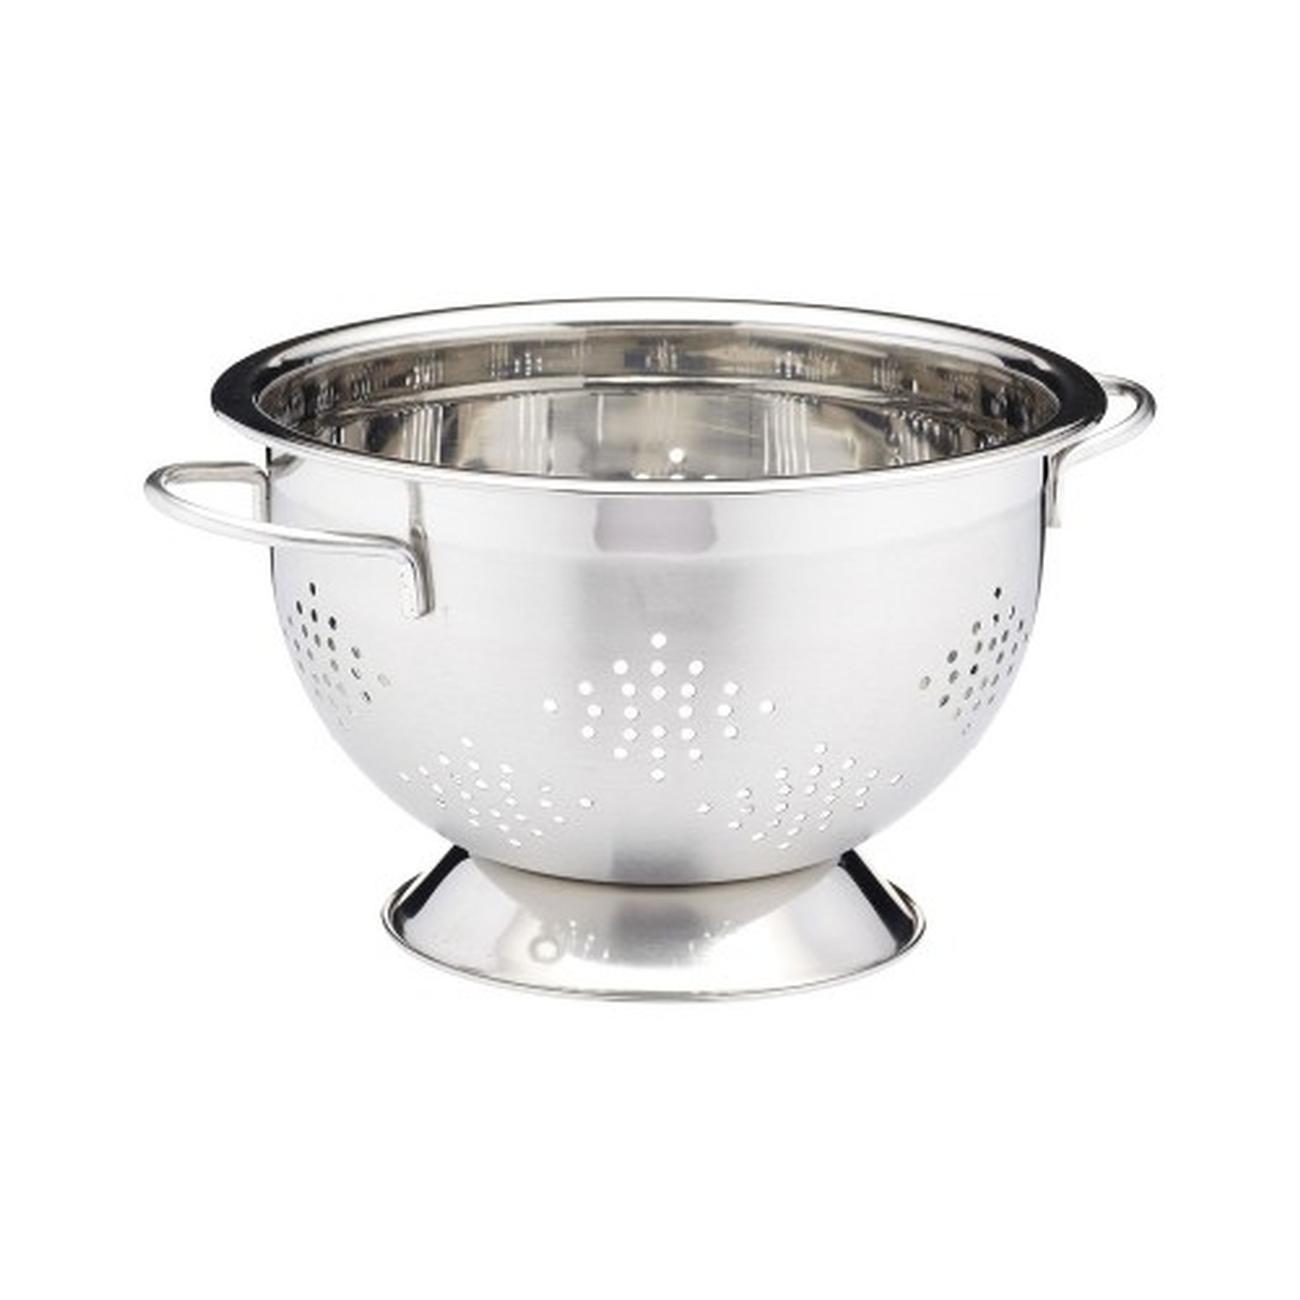 mc-deluxed-25-5cm-two-handled-colander - MasterClass Deluxe 25.5cm Two Handled Colander